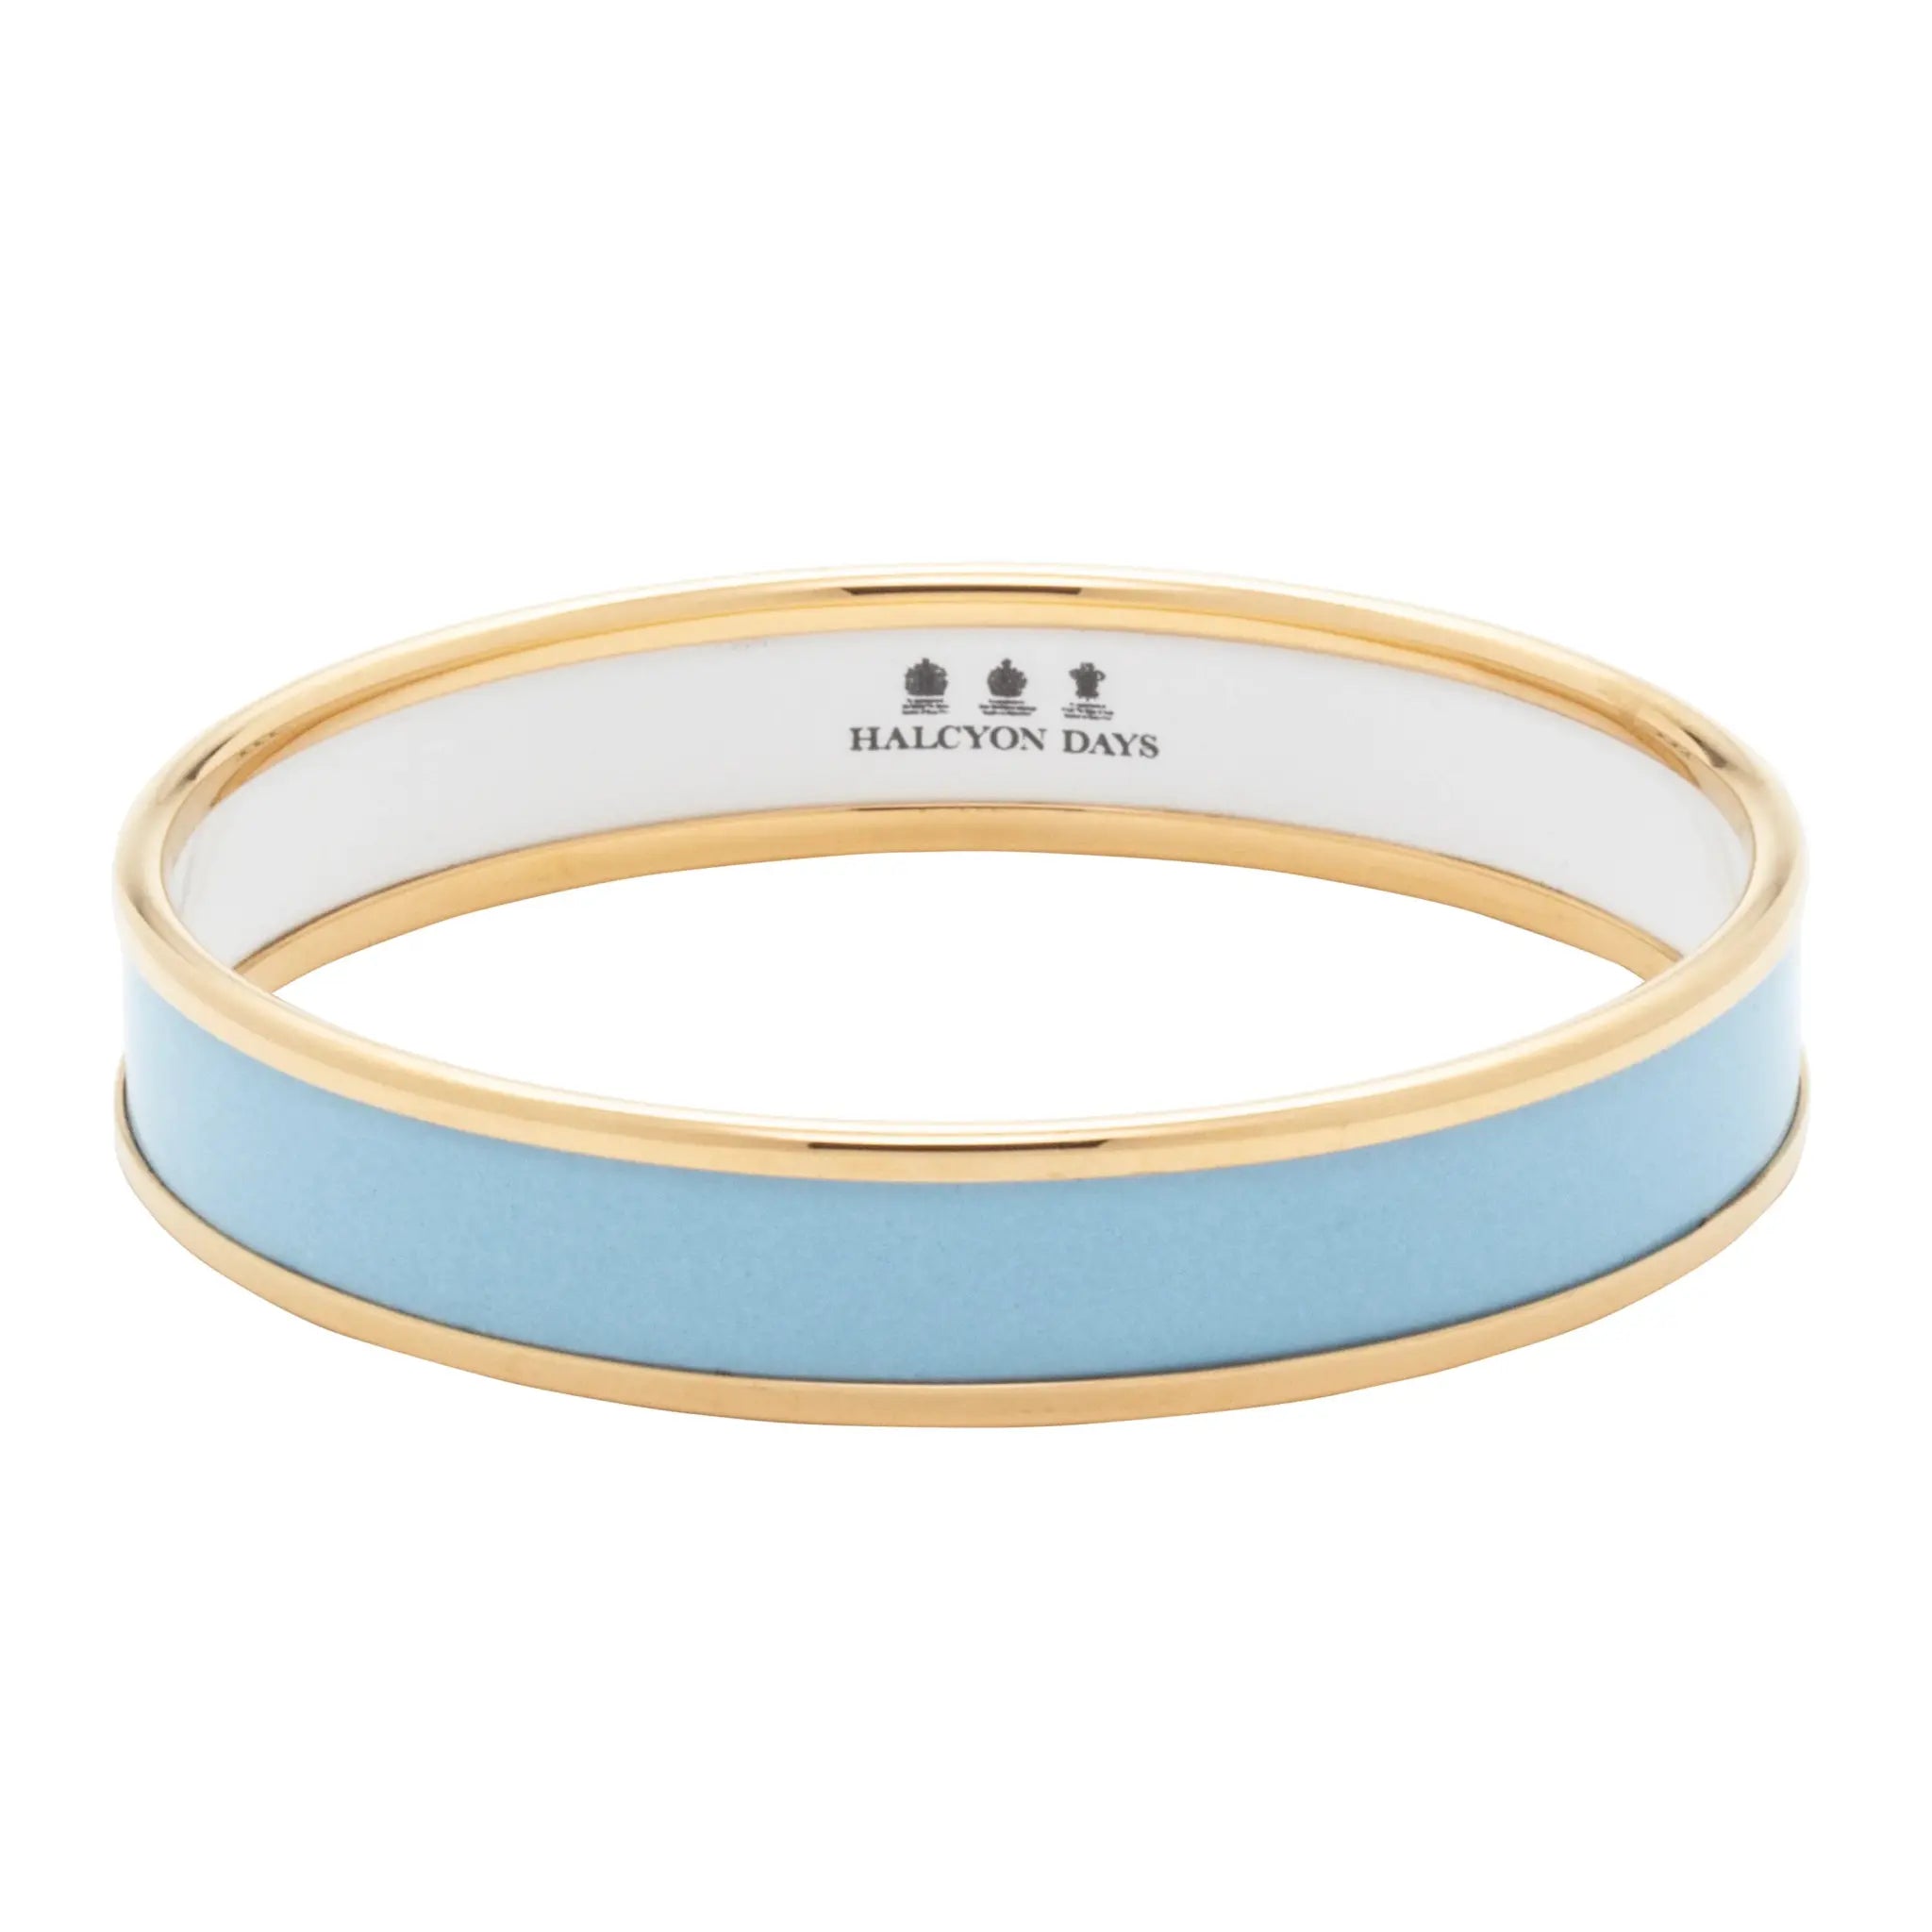 Halcyon Days Enamel Bangle in Forget me not blue and gold